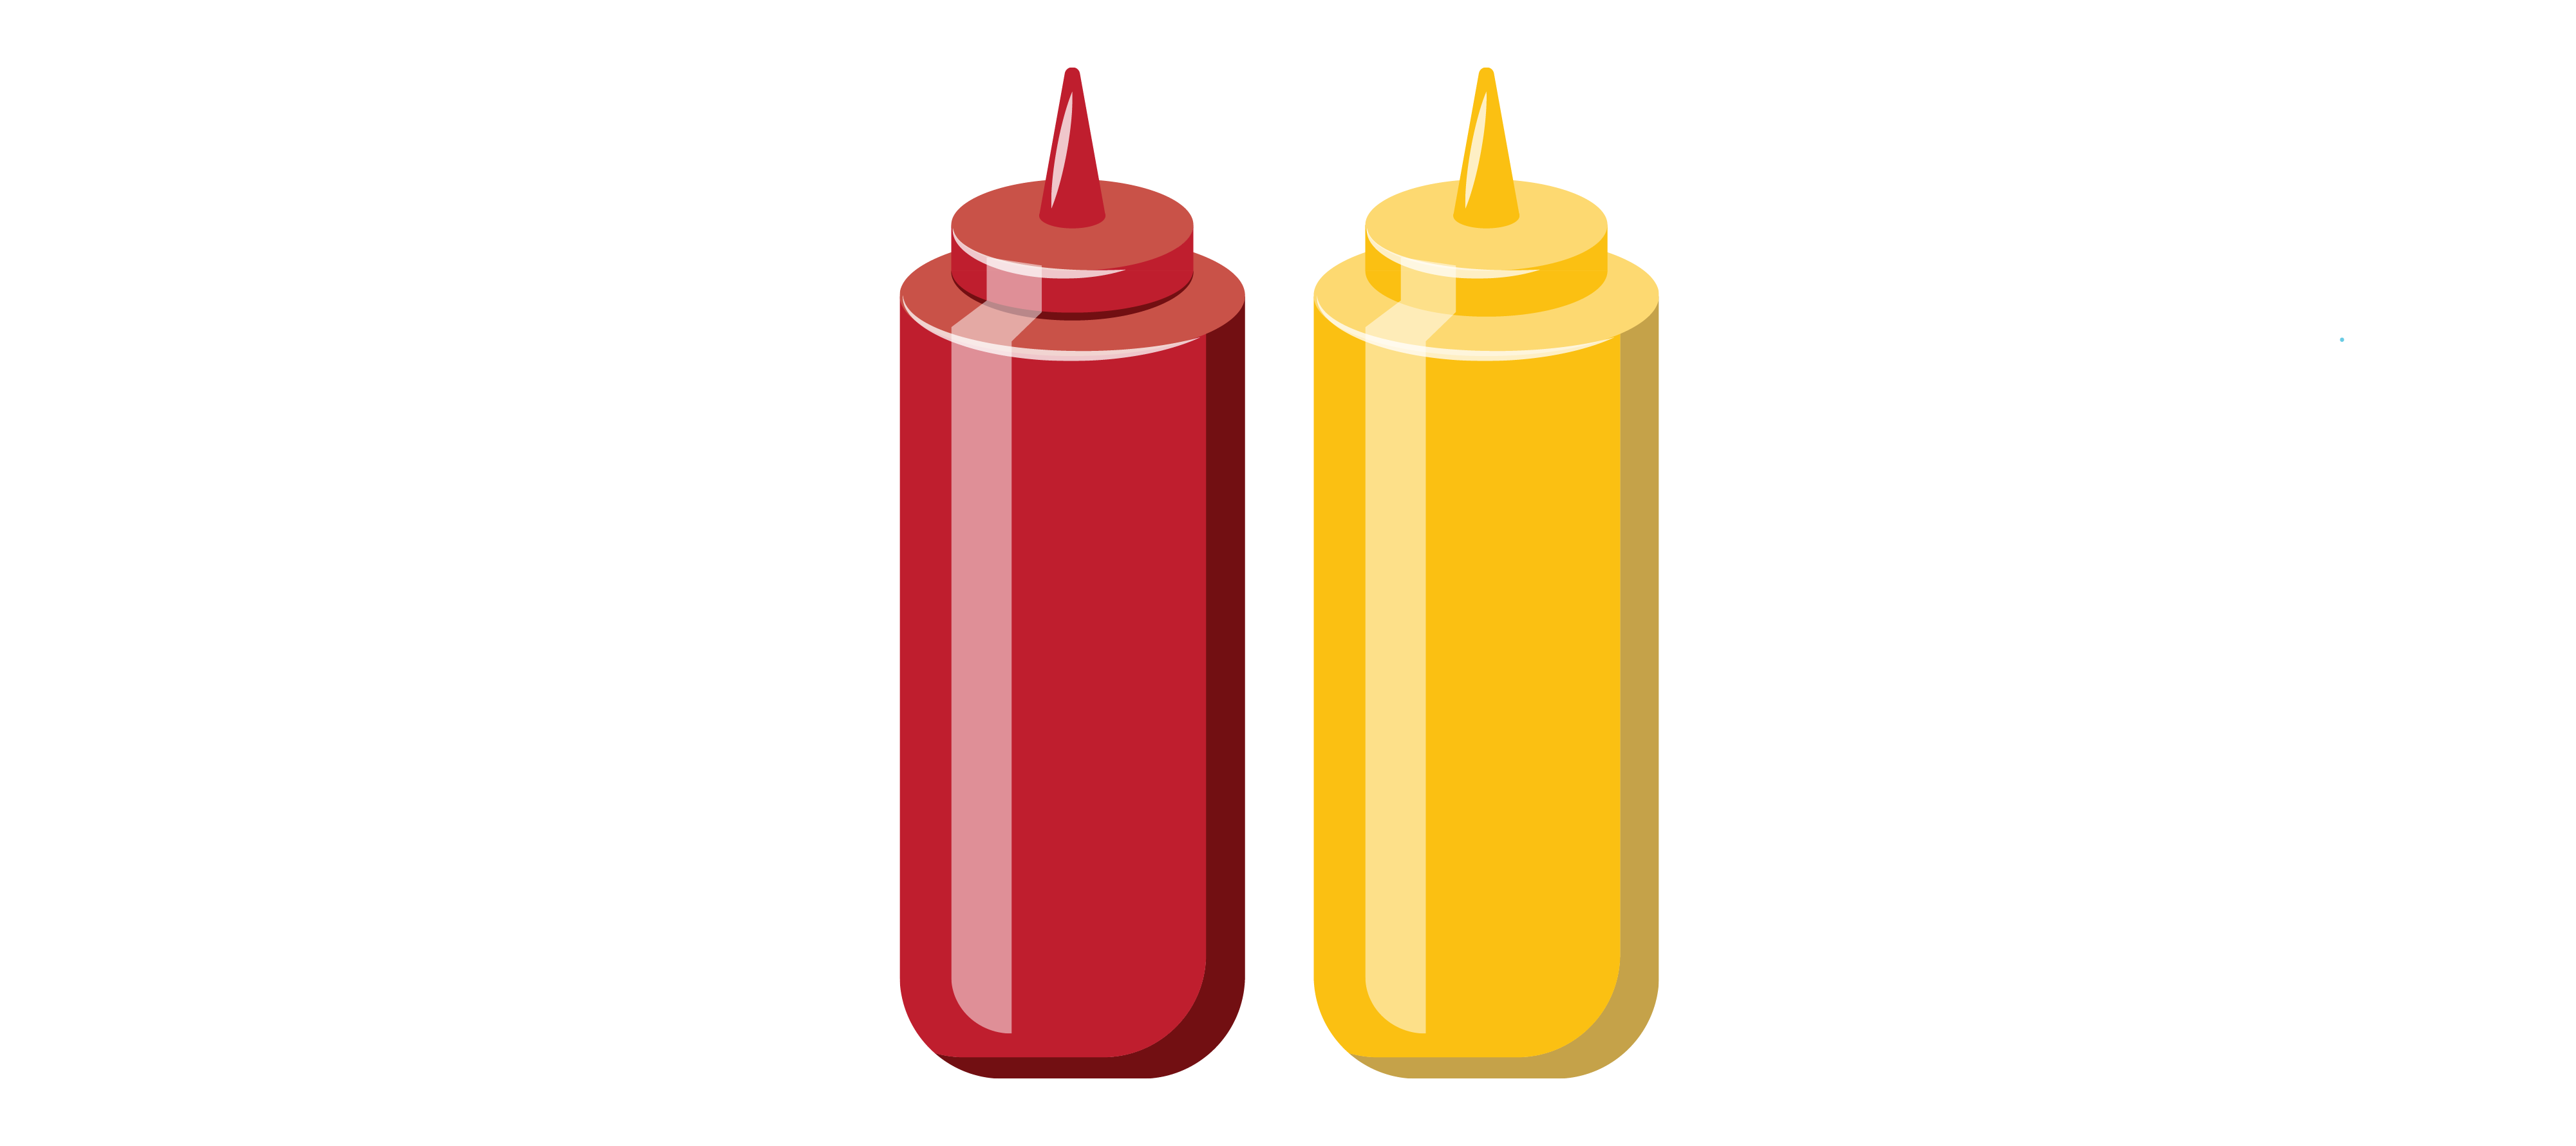 A red plastic condiment squeeze bottle stands beside a yellow plastic condiment squeeze bottle.